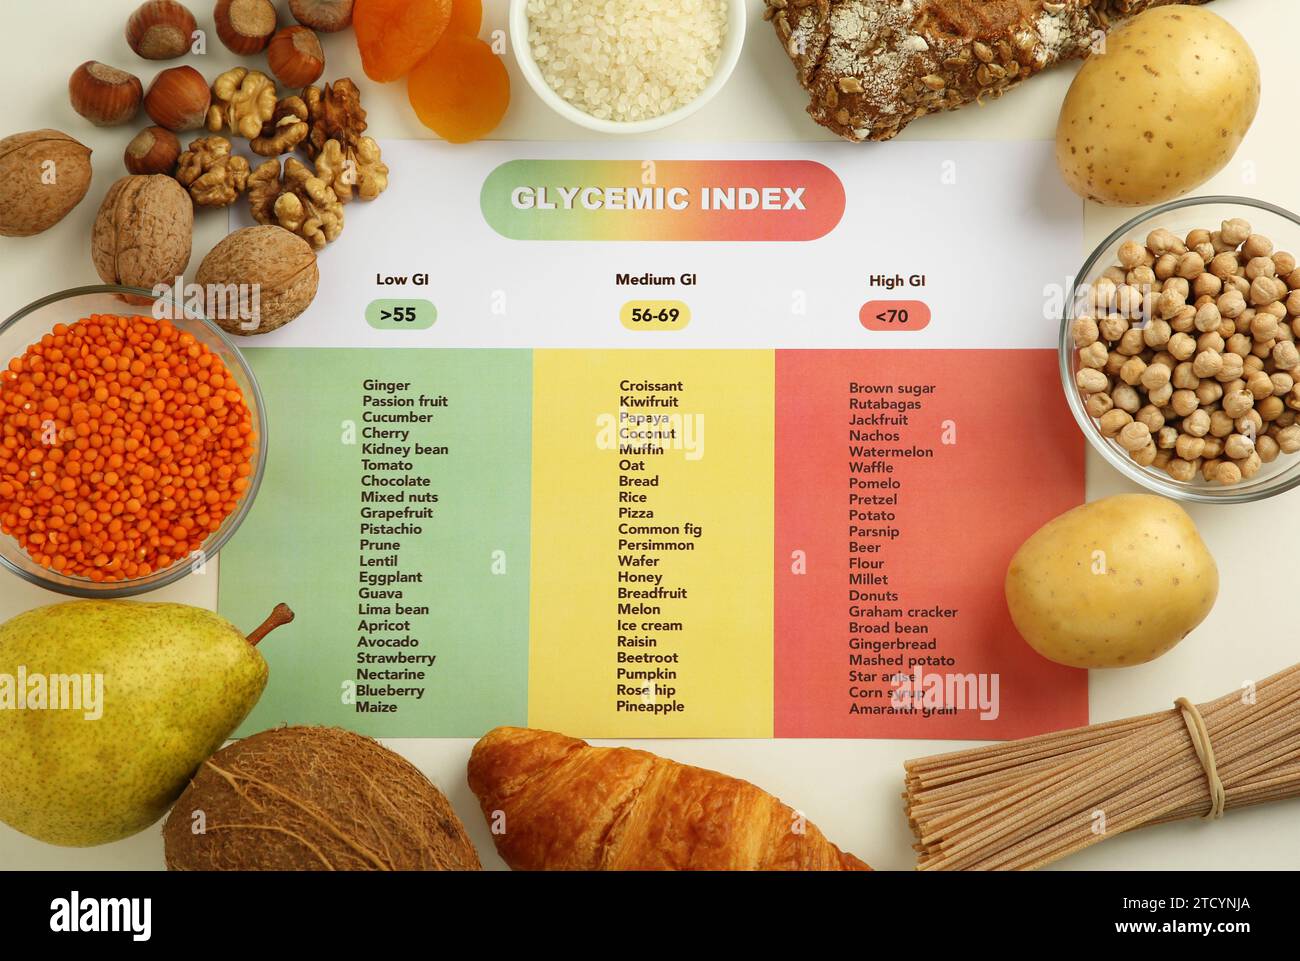 Paper with glycemic index chart and products on white table, flat lay Stock Photo